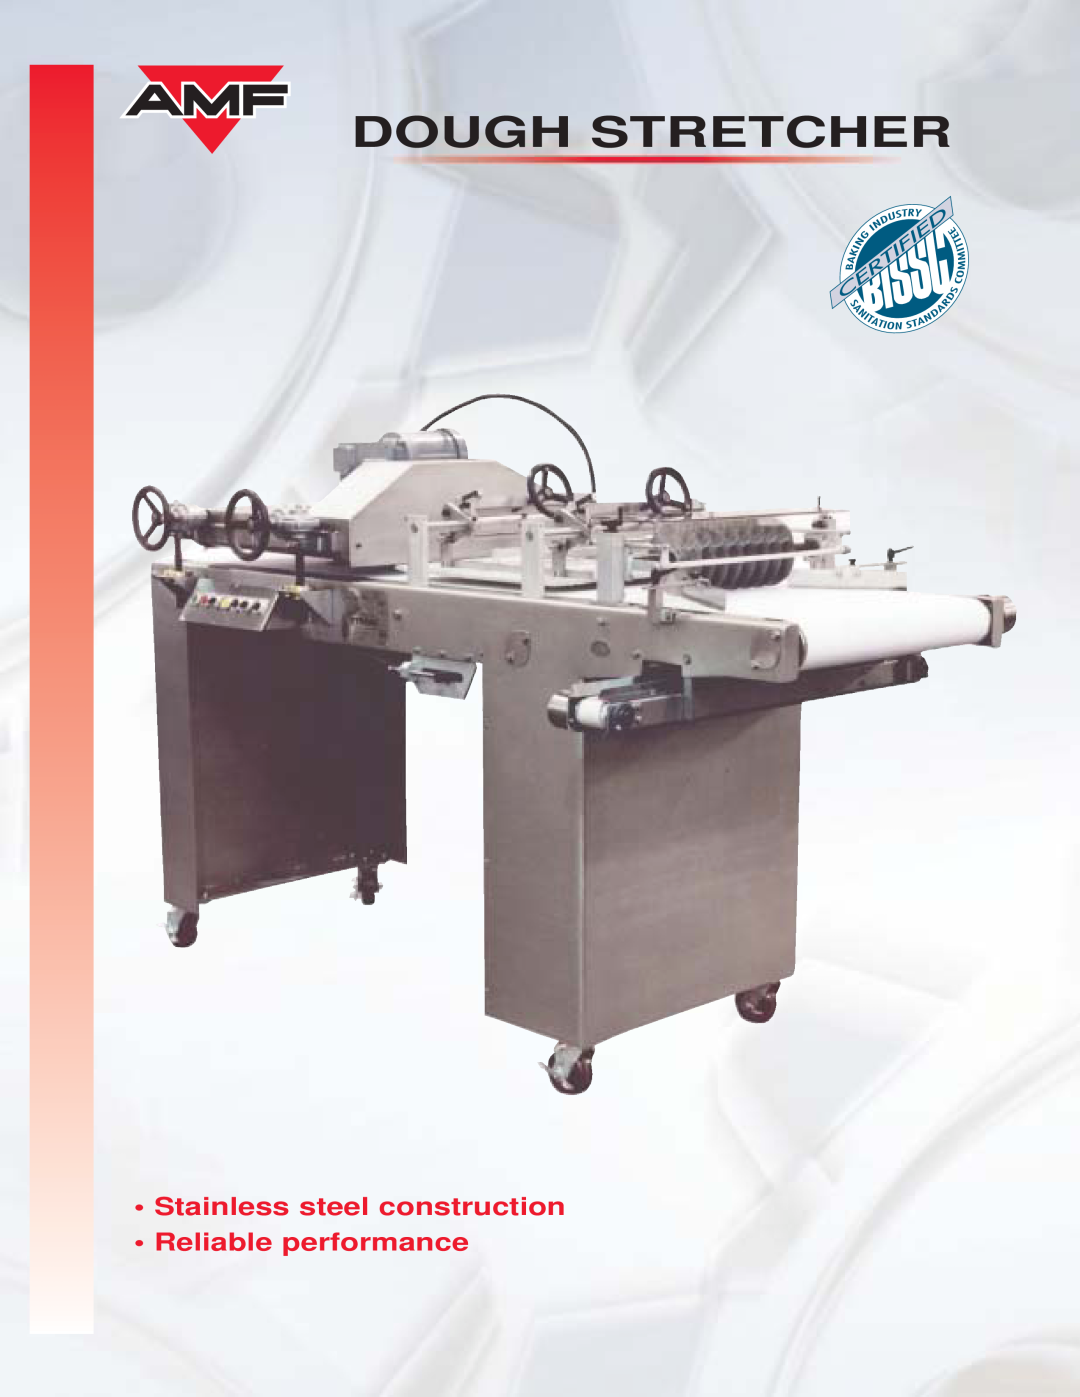 AMF Dough Stretcher manual Stainless steel construction, Reliable performance 